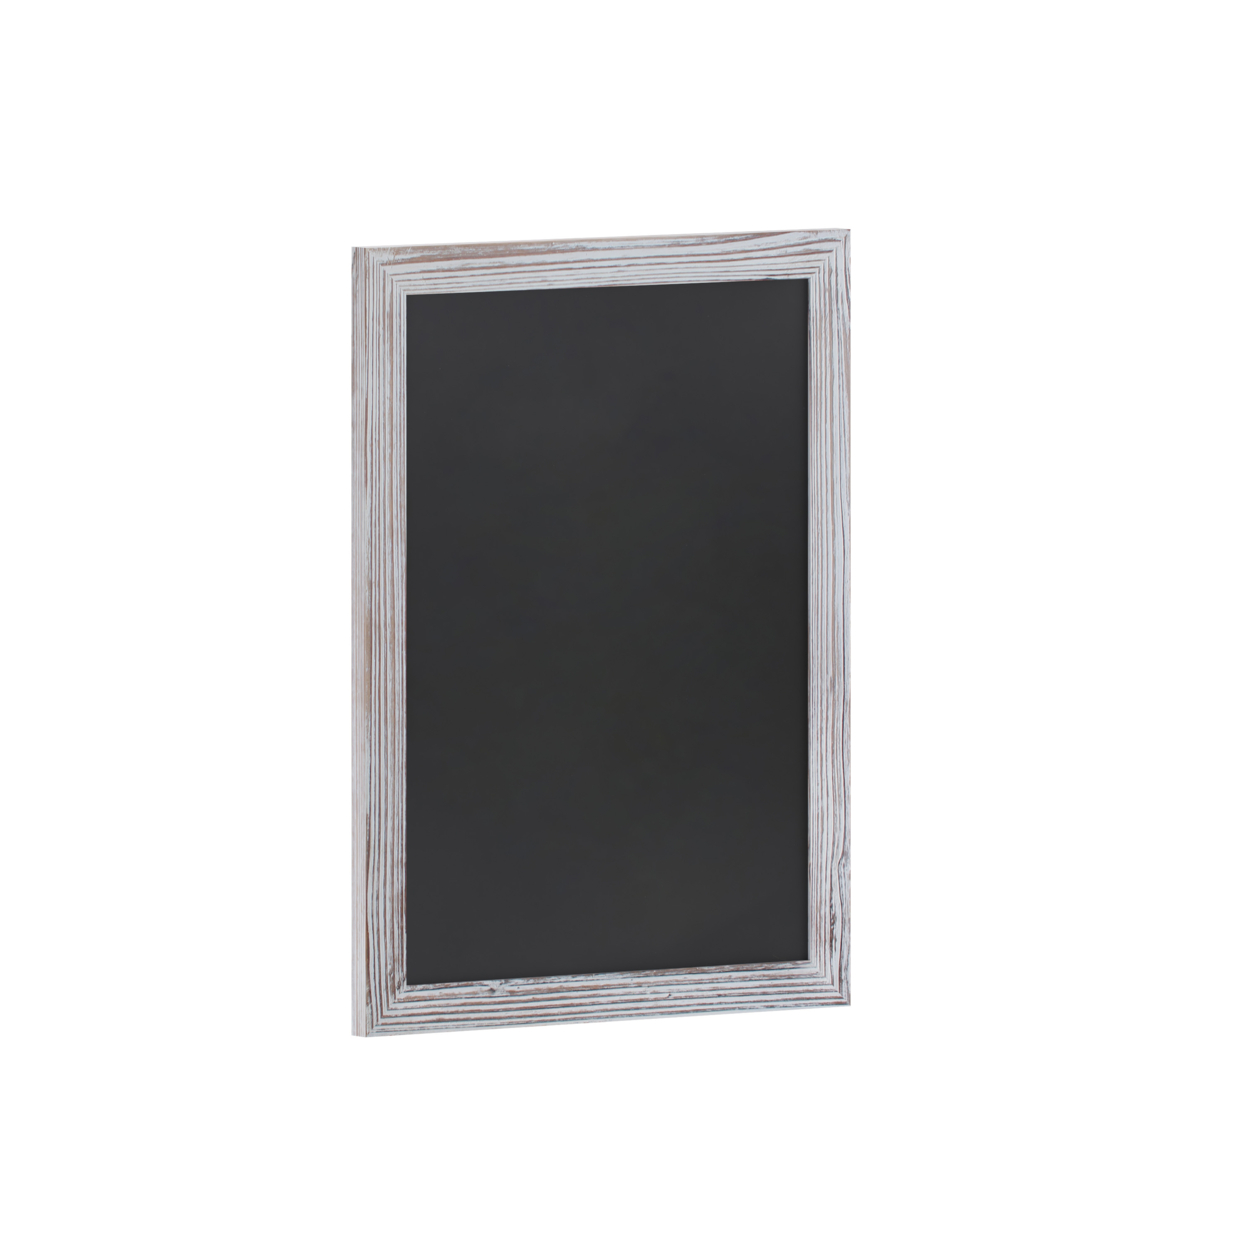 24 Inch Wall Hanging Magnetic Chalkboard, Pine Wood Frame, Whitewashed